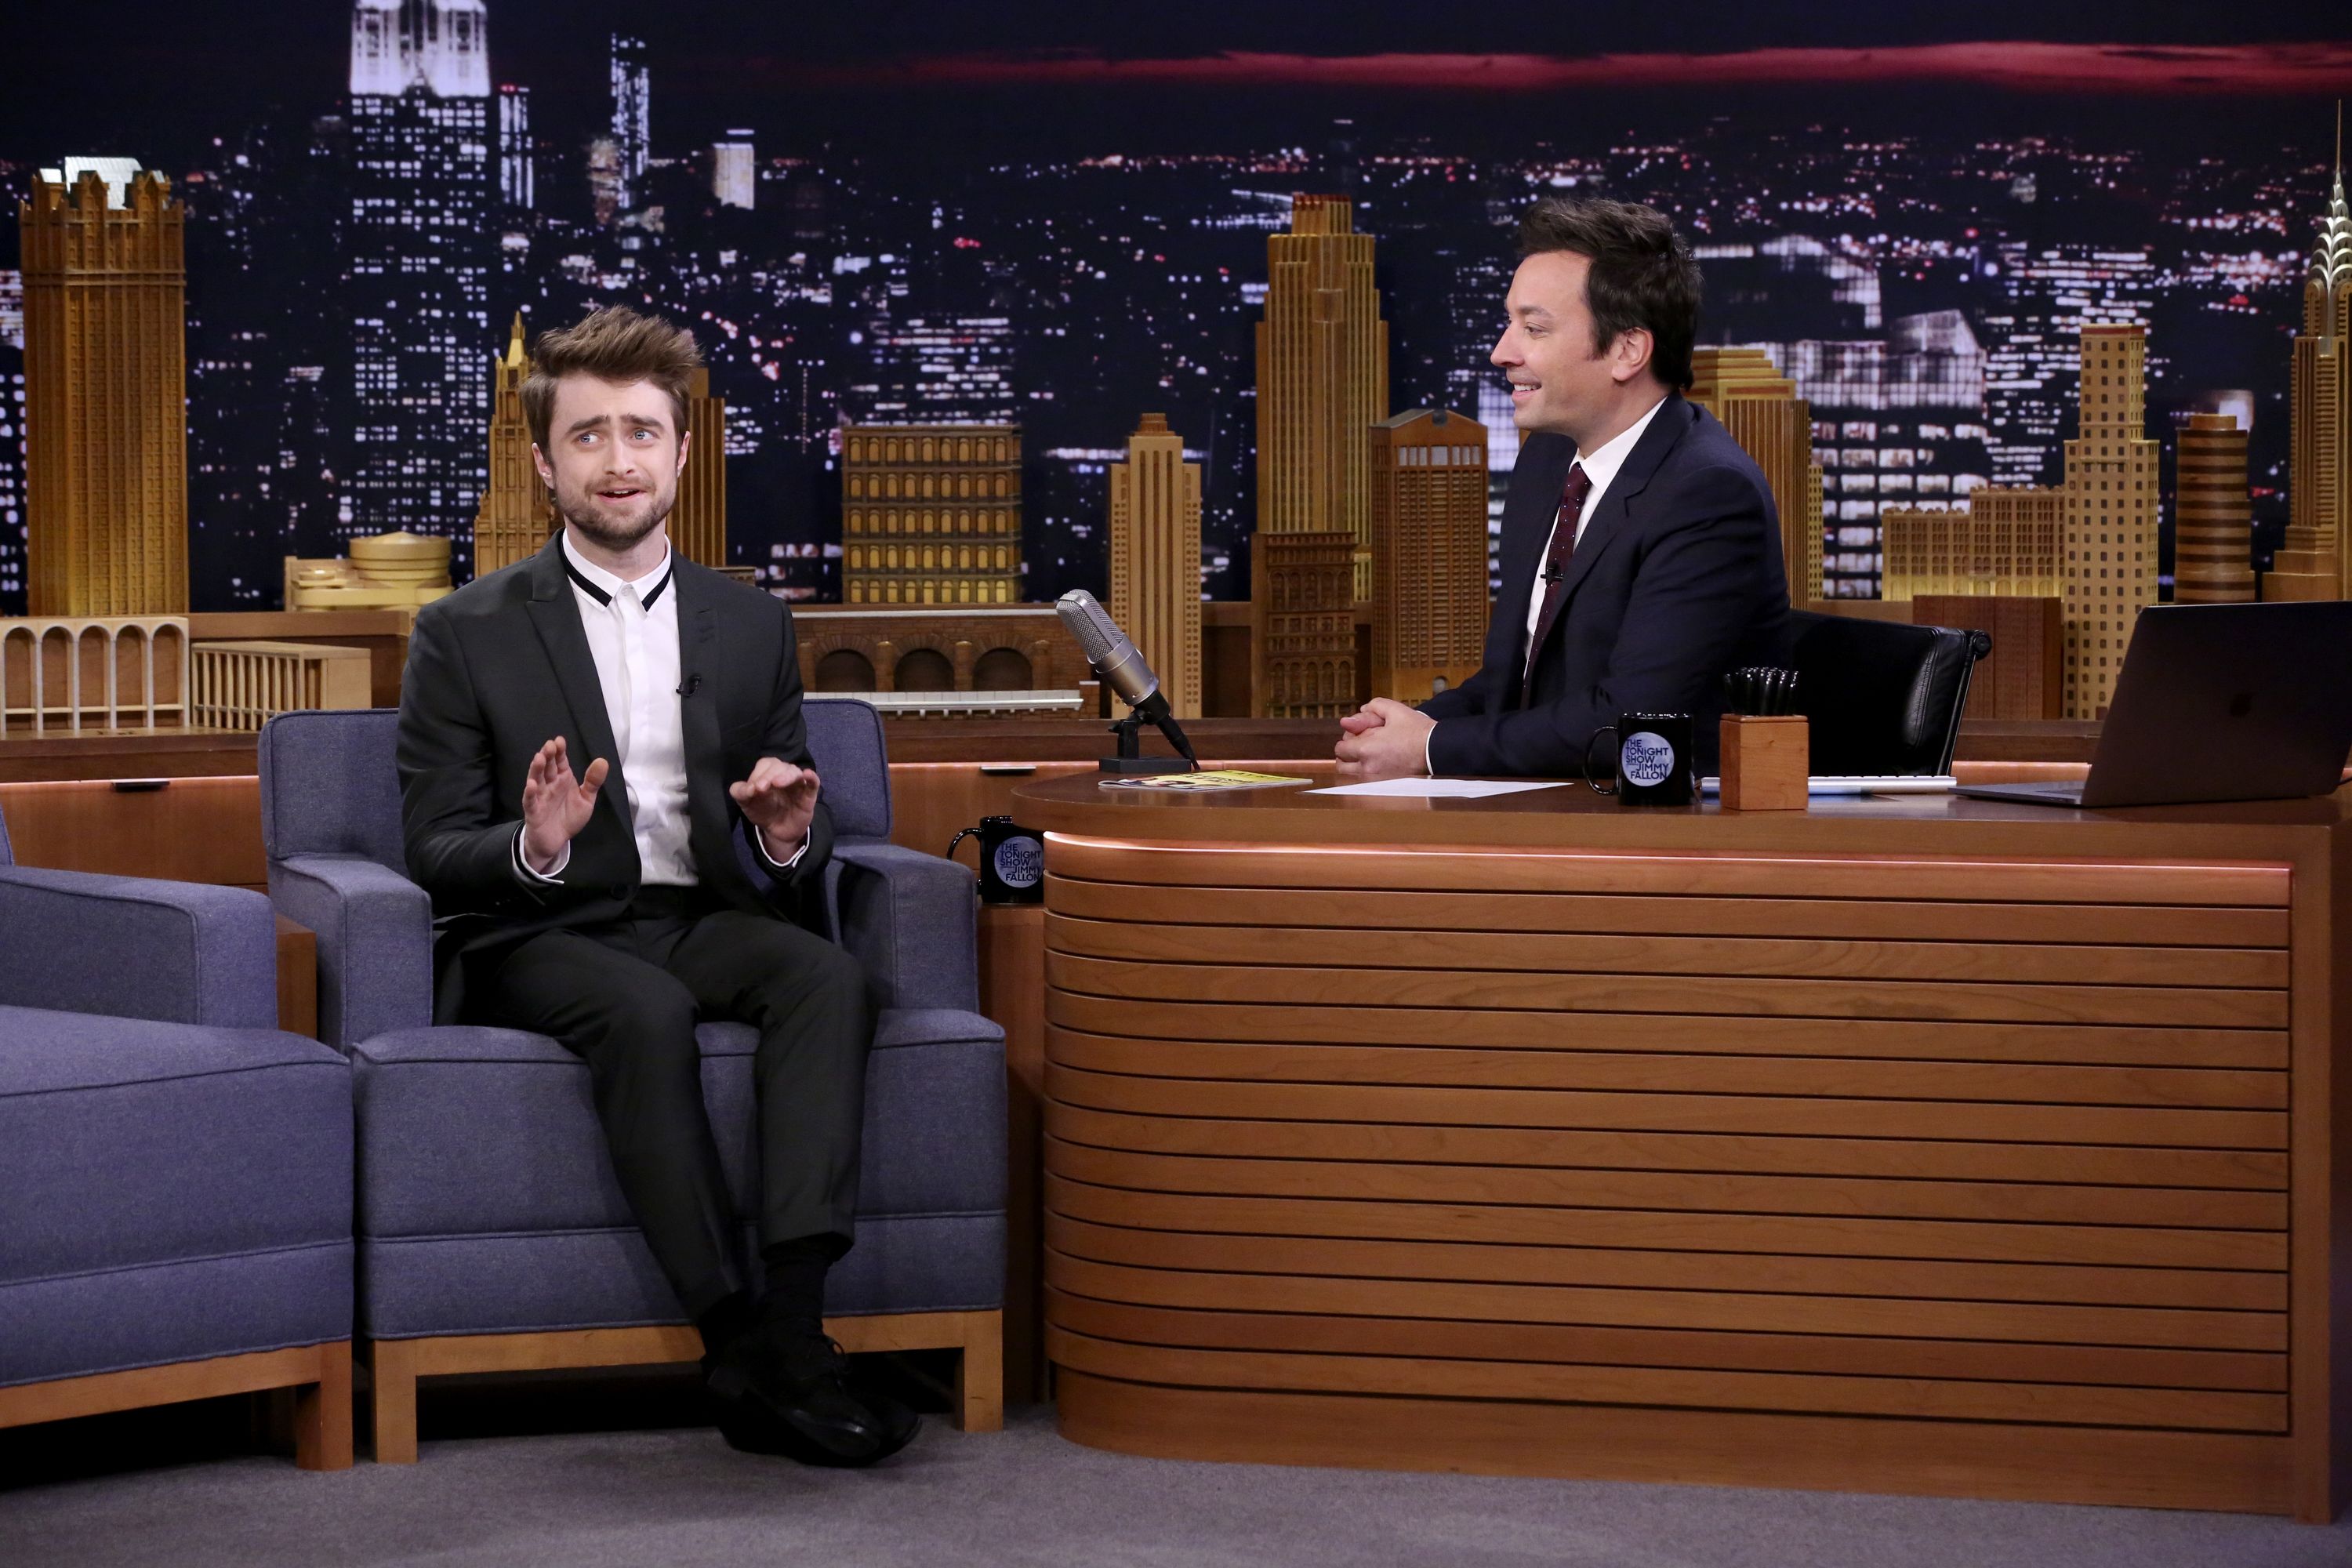 Daniel Radcliffe Reacts to Harry Potter Memes 